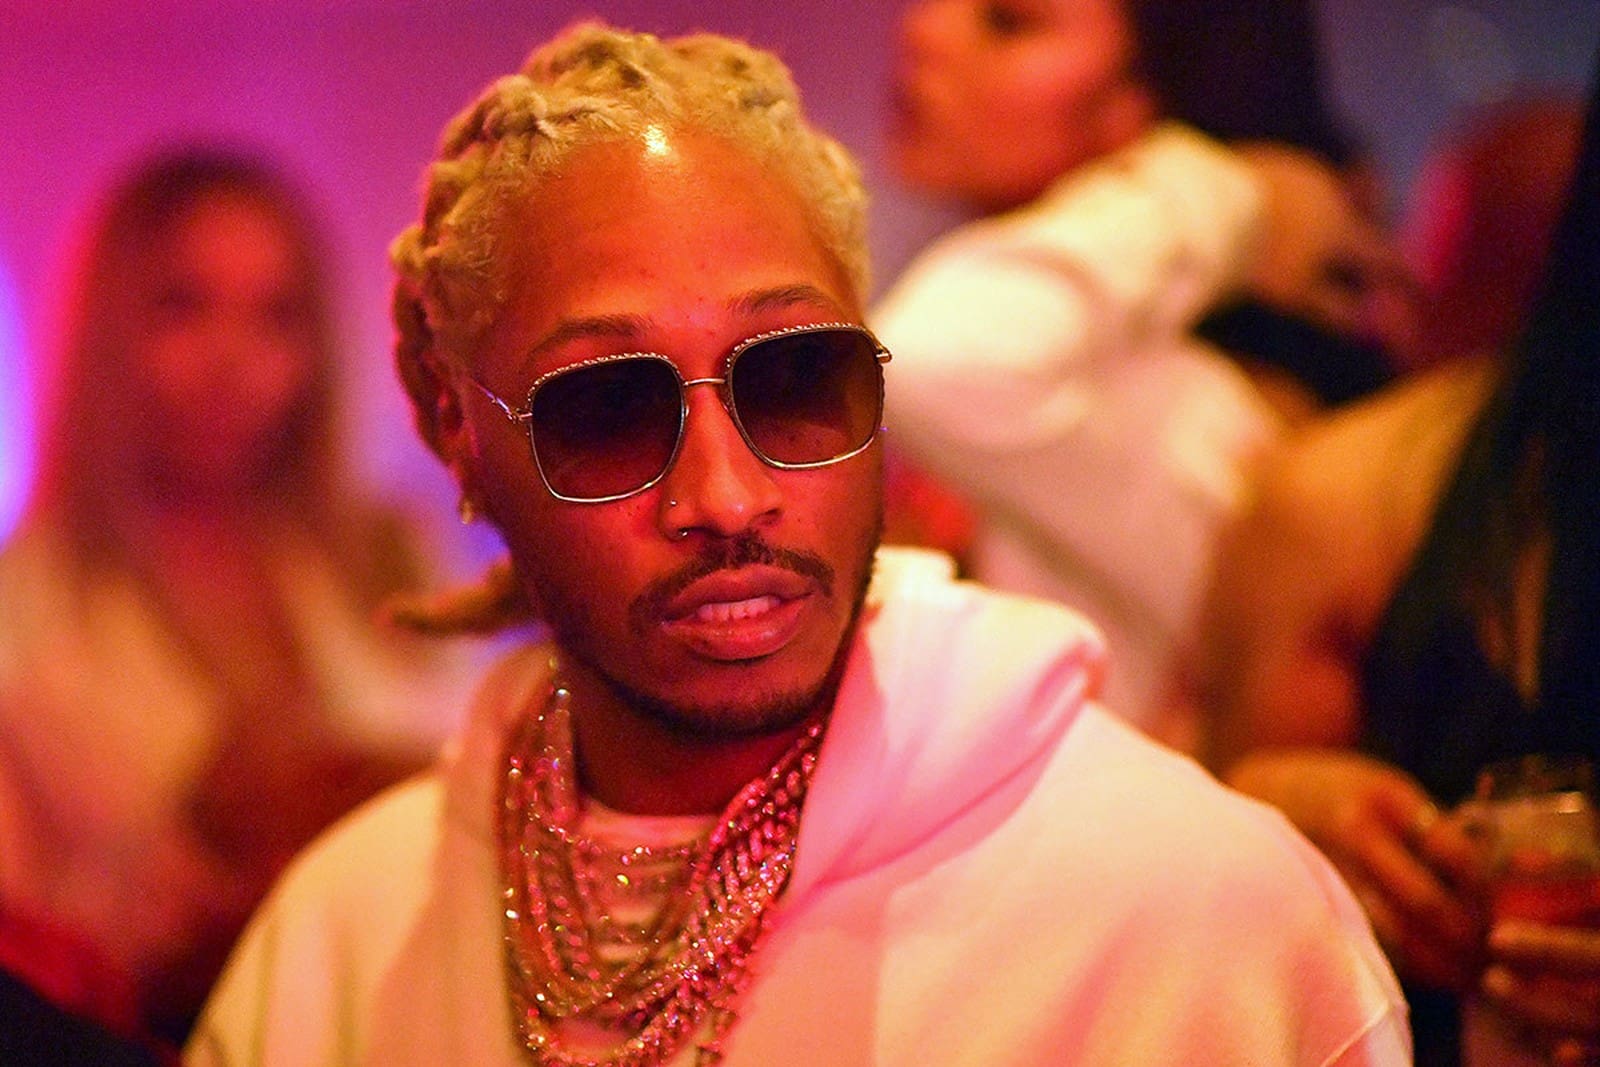 future-says-he-never-loved-joie-chavis-check-out-the-audio